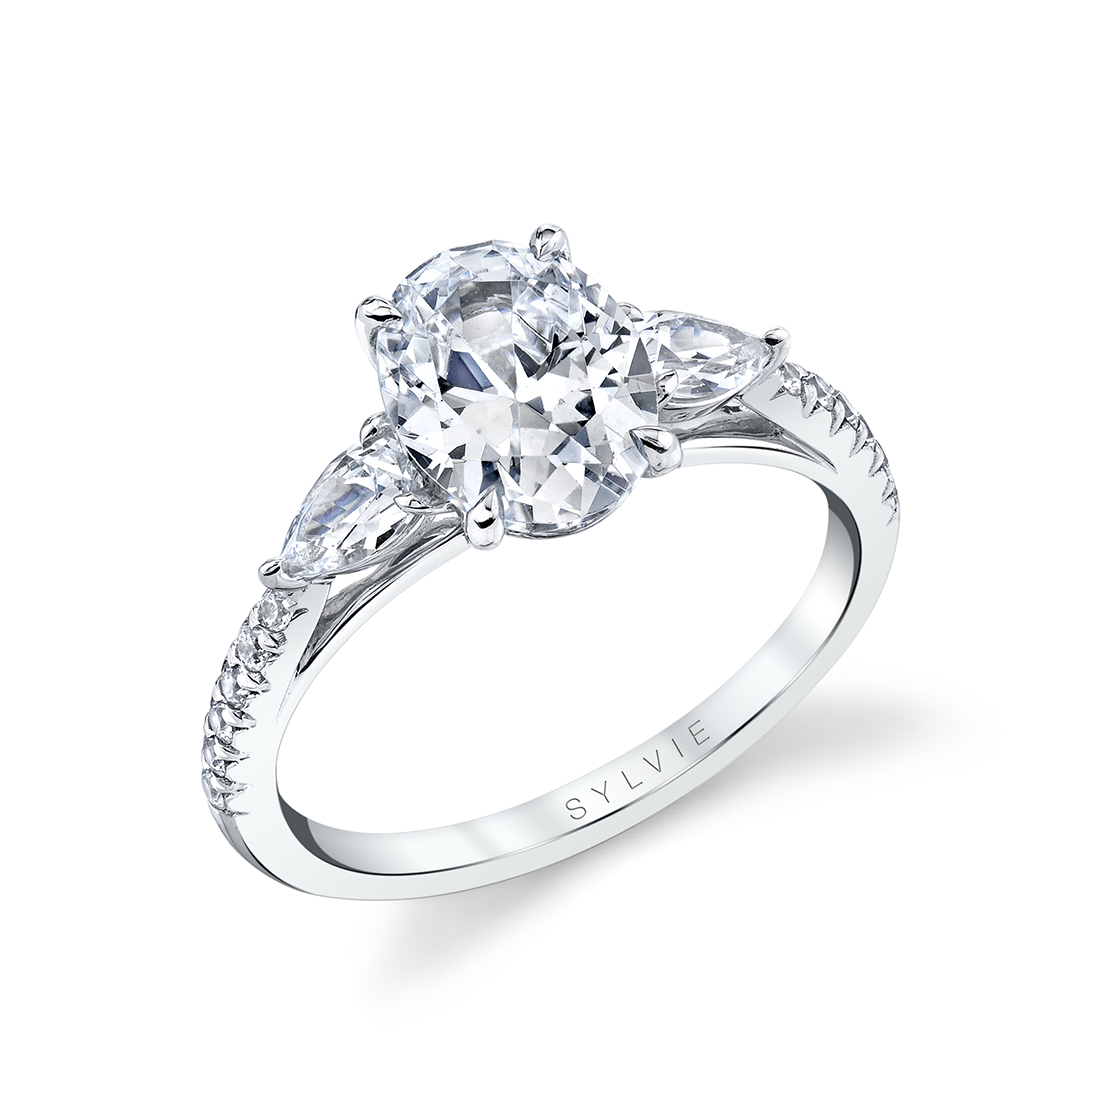 Profile Image of 3 Stone Engagement Ring with Pear Side Stones in White Gold - Vanna